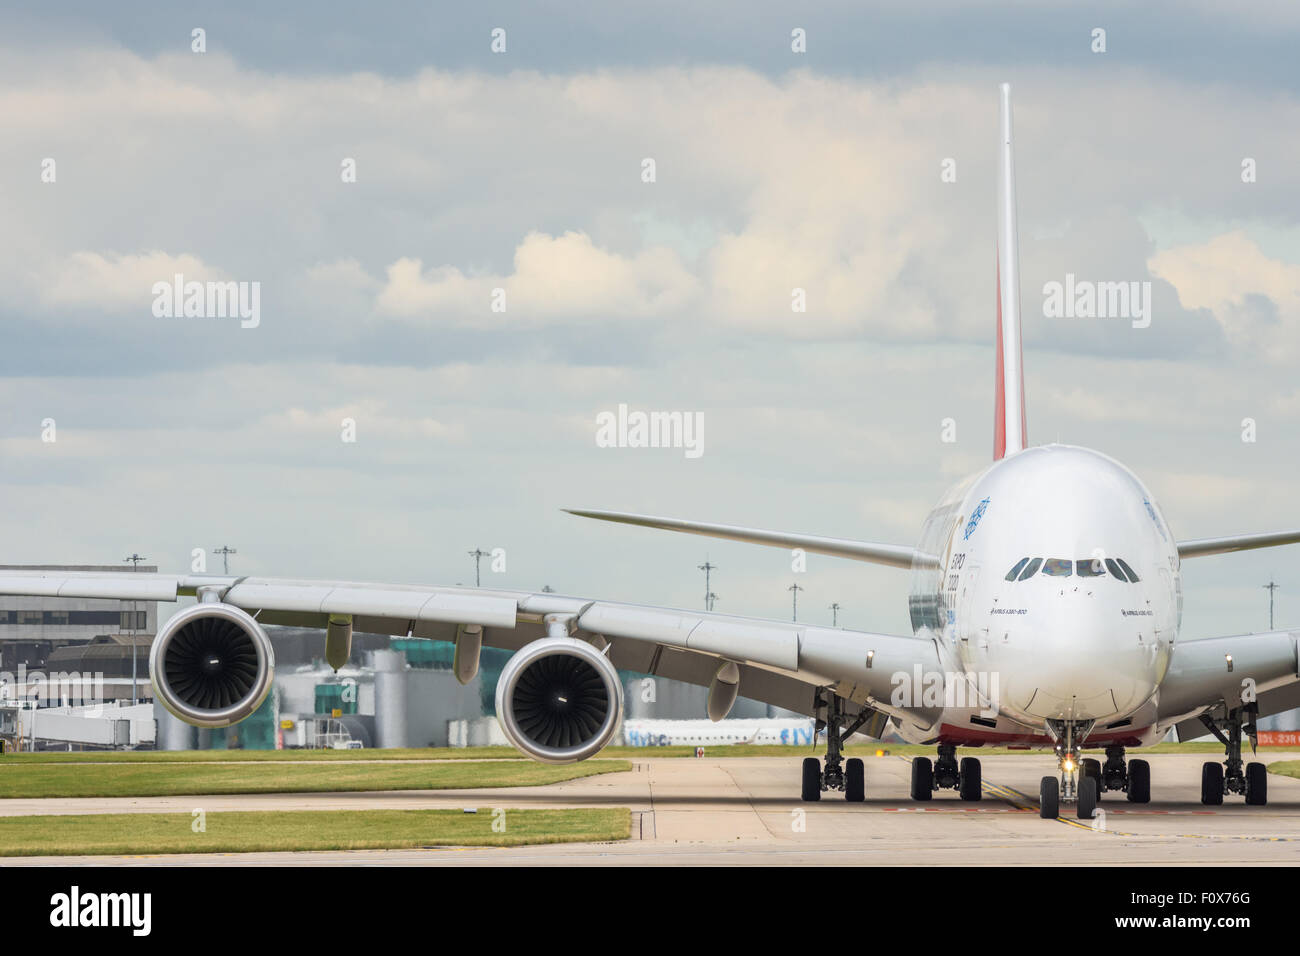 Head on view of an Emirates Airbus A380-800 aeroplane waiting to join the runway at Manchester Airport showing the massive wingspan of the aircraft Stock Photo